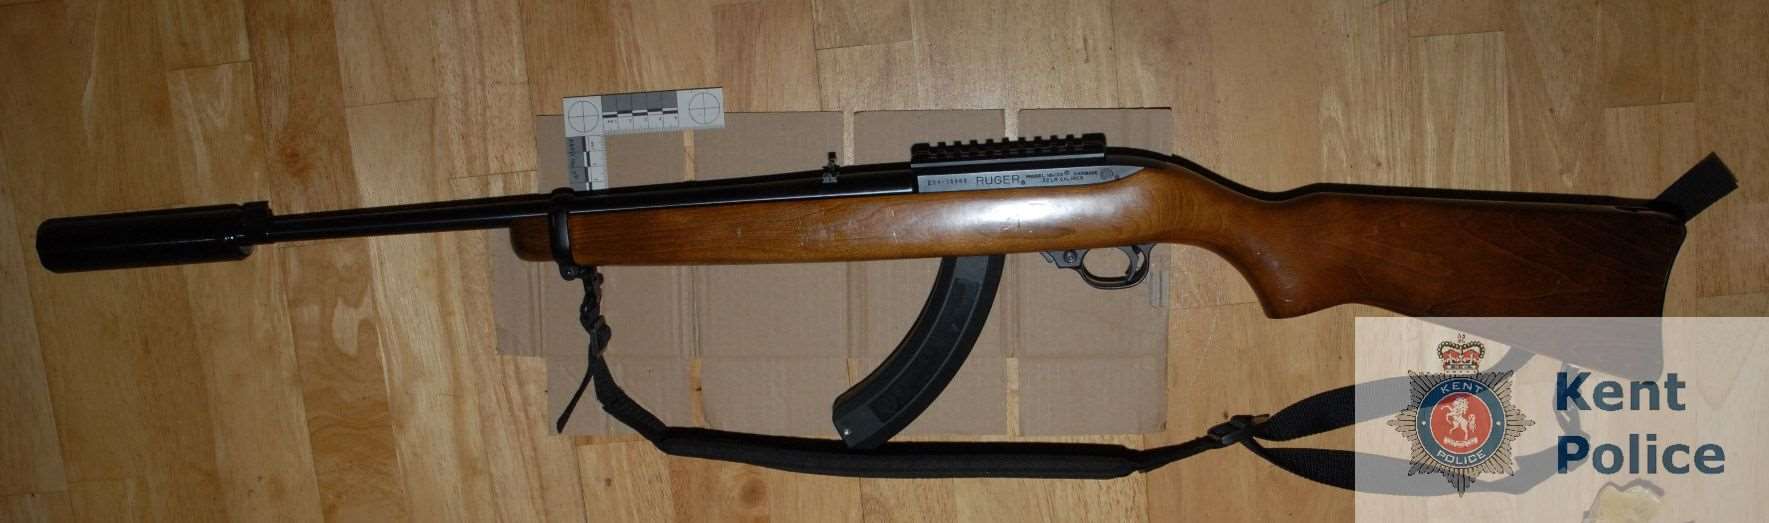 Officers found this gun at Mayne's address. Pic courtesy of Kent Police